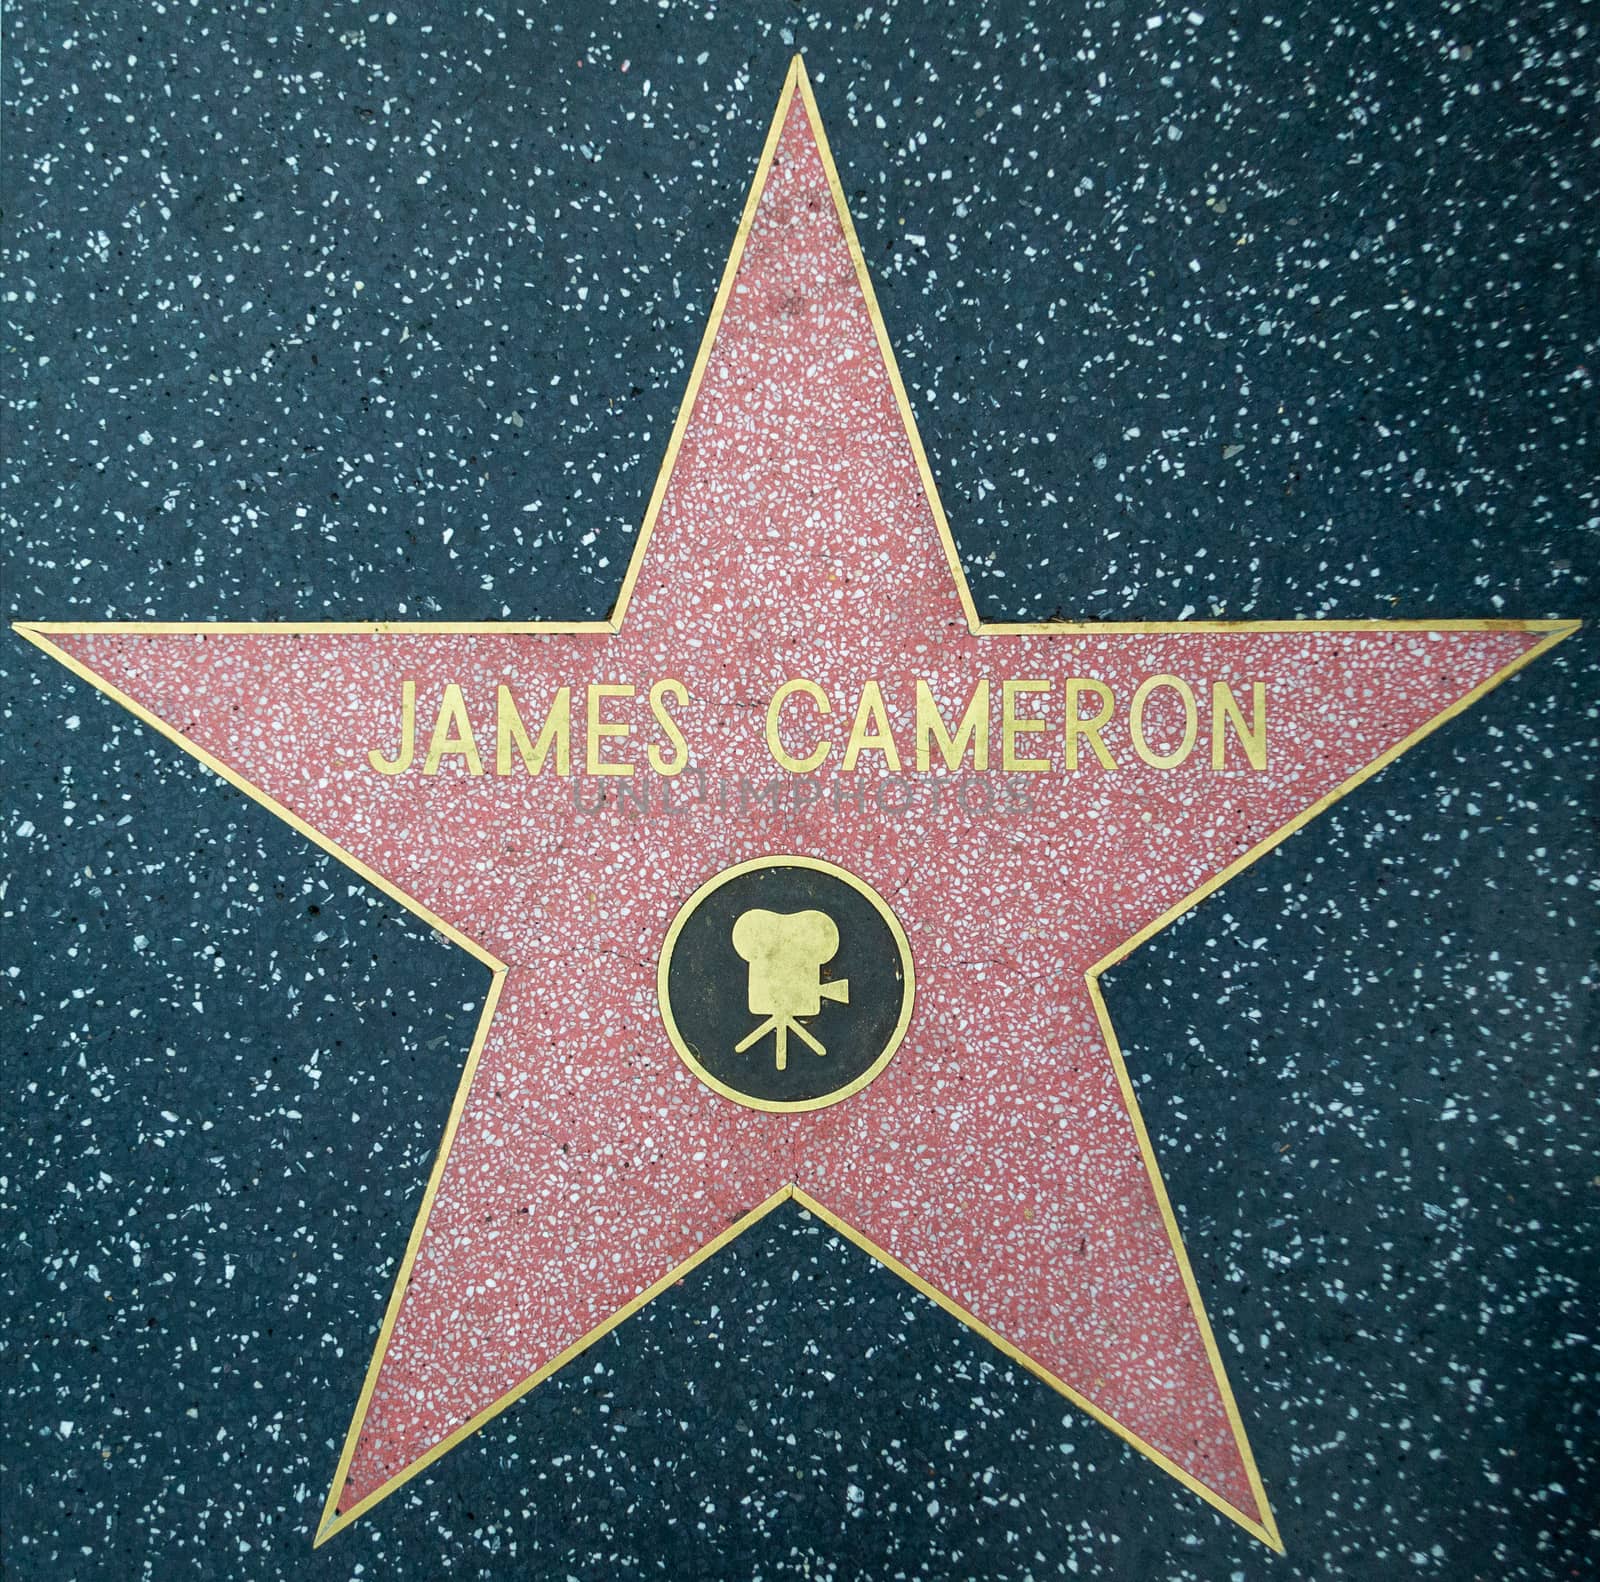 James Cameron star on the walk of fame, hollywood boulevard in Los Angeles, USA. by kb79